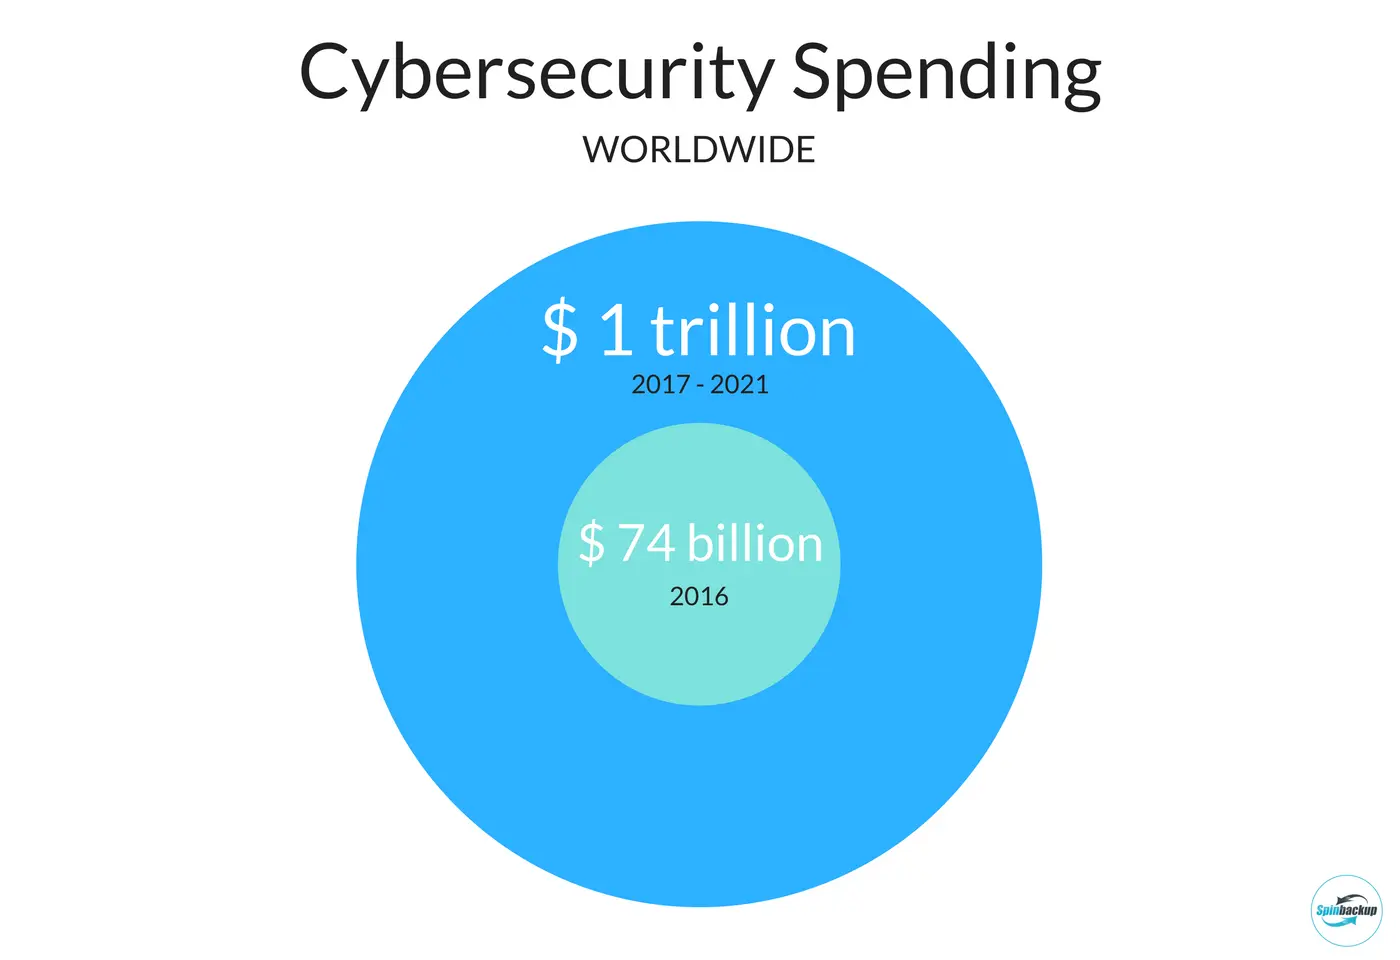 Cyber security spending